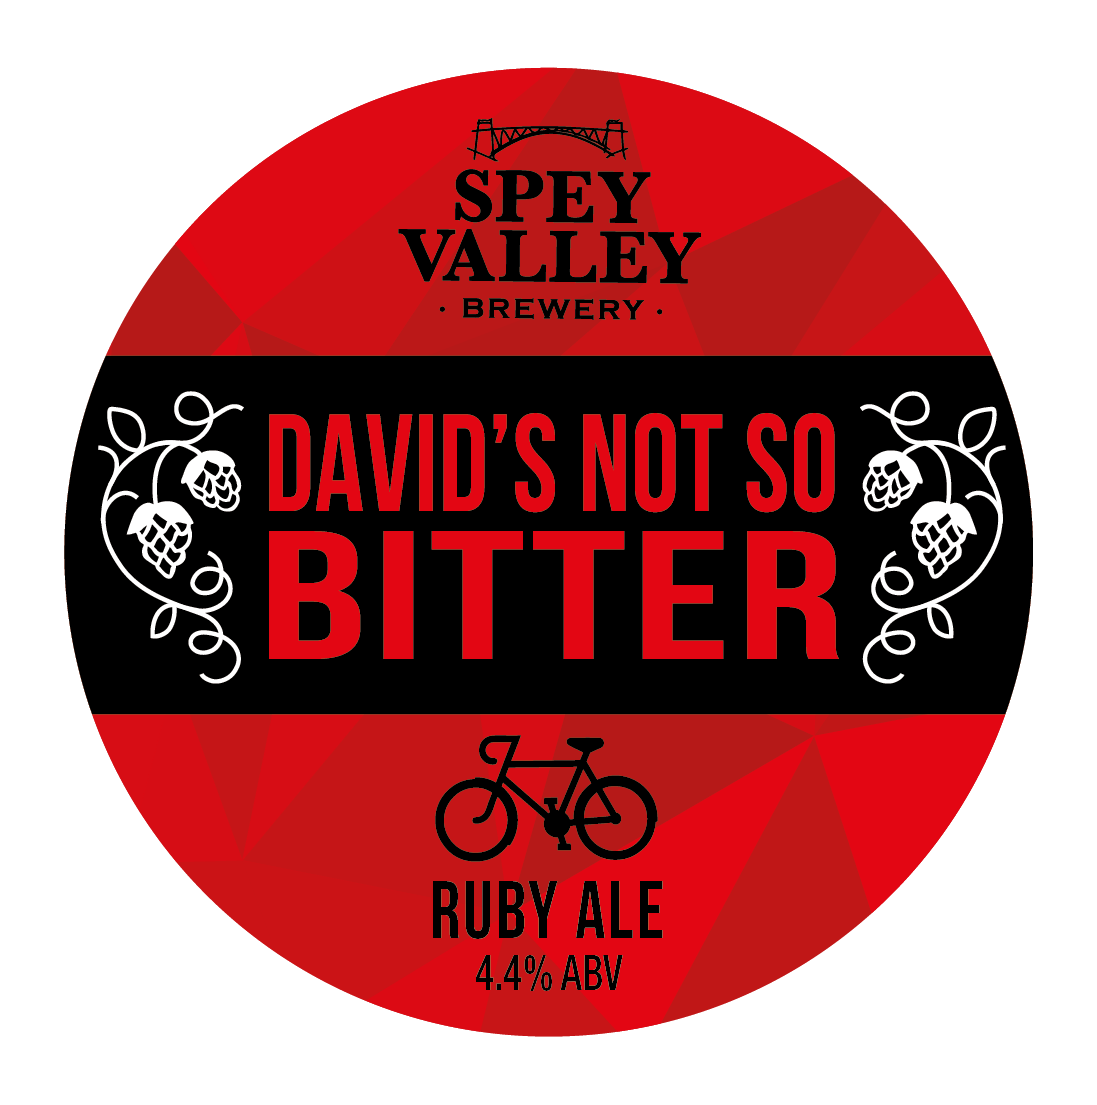 Spey Valley David’s Not so Bitter 9 Gallons Ruby 4.4%